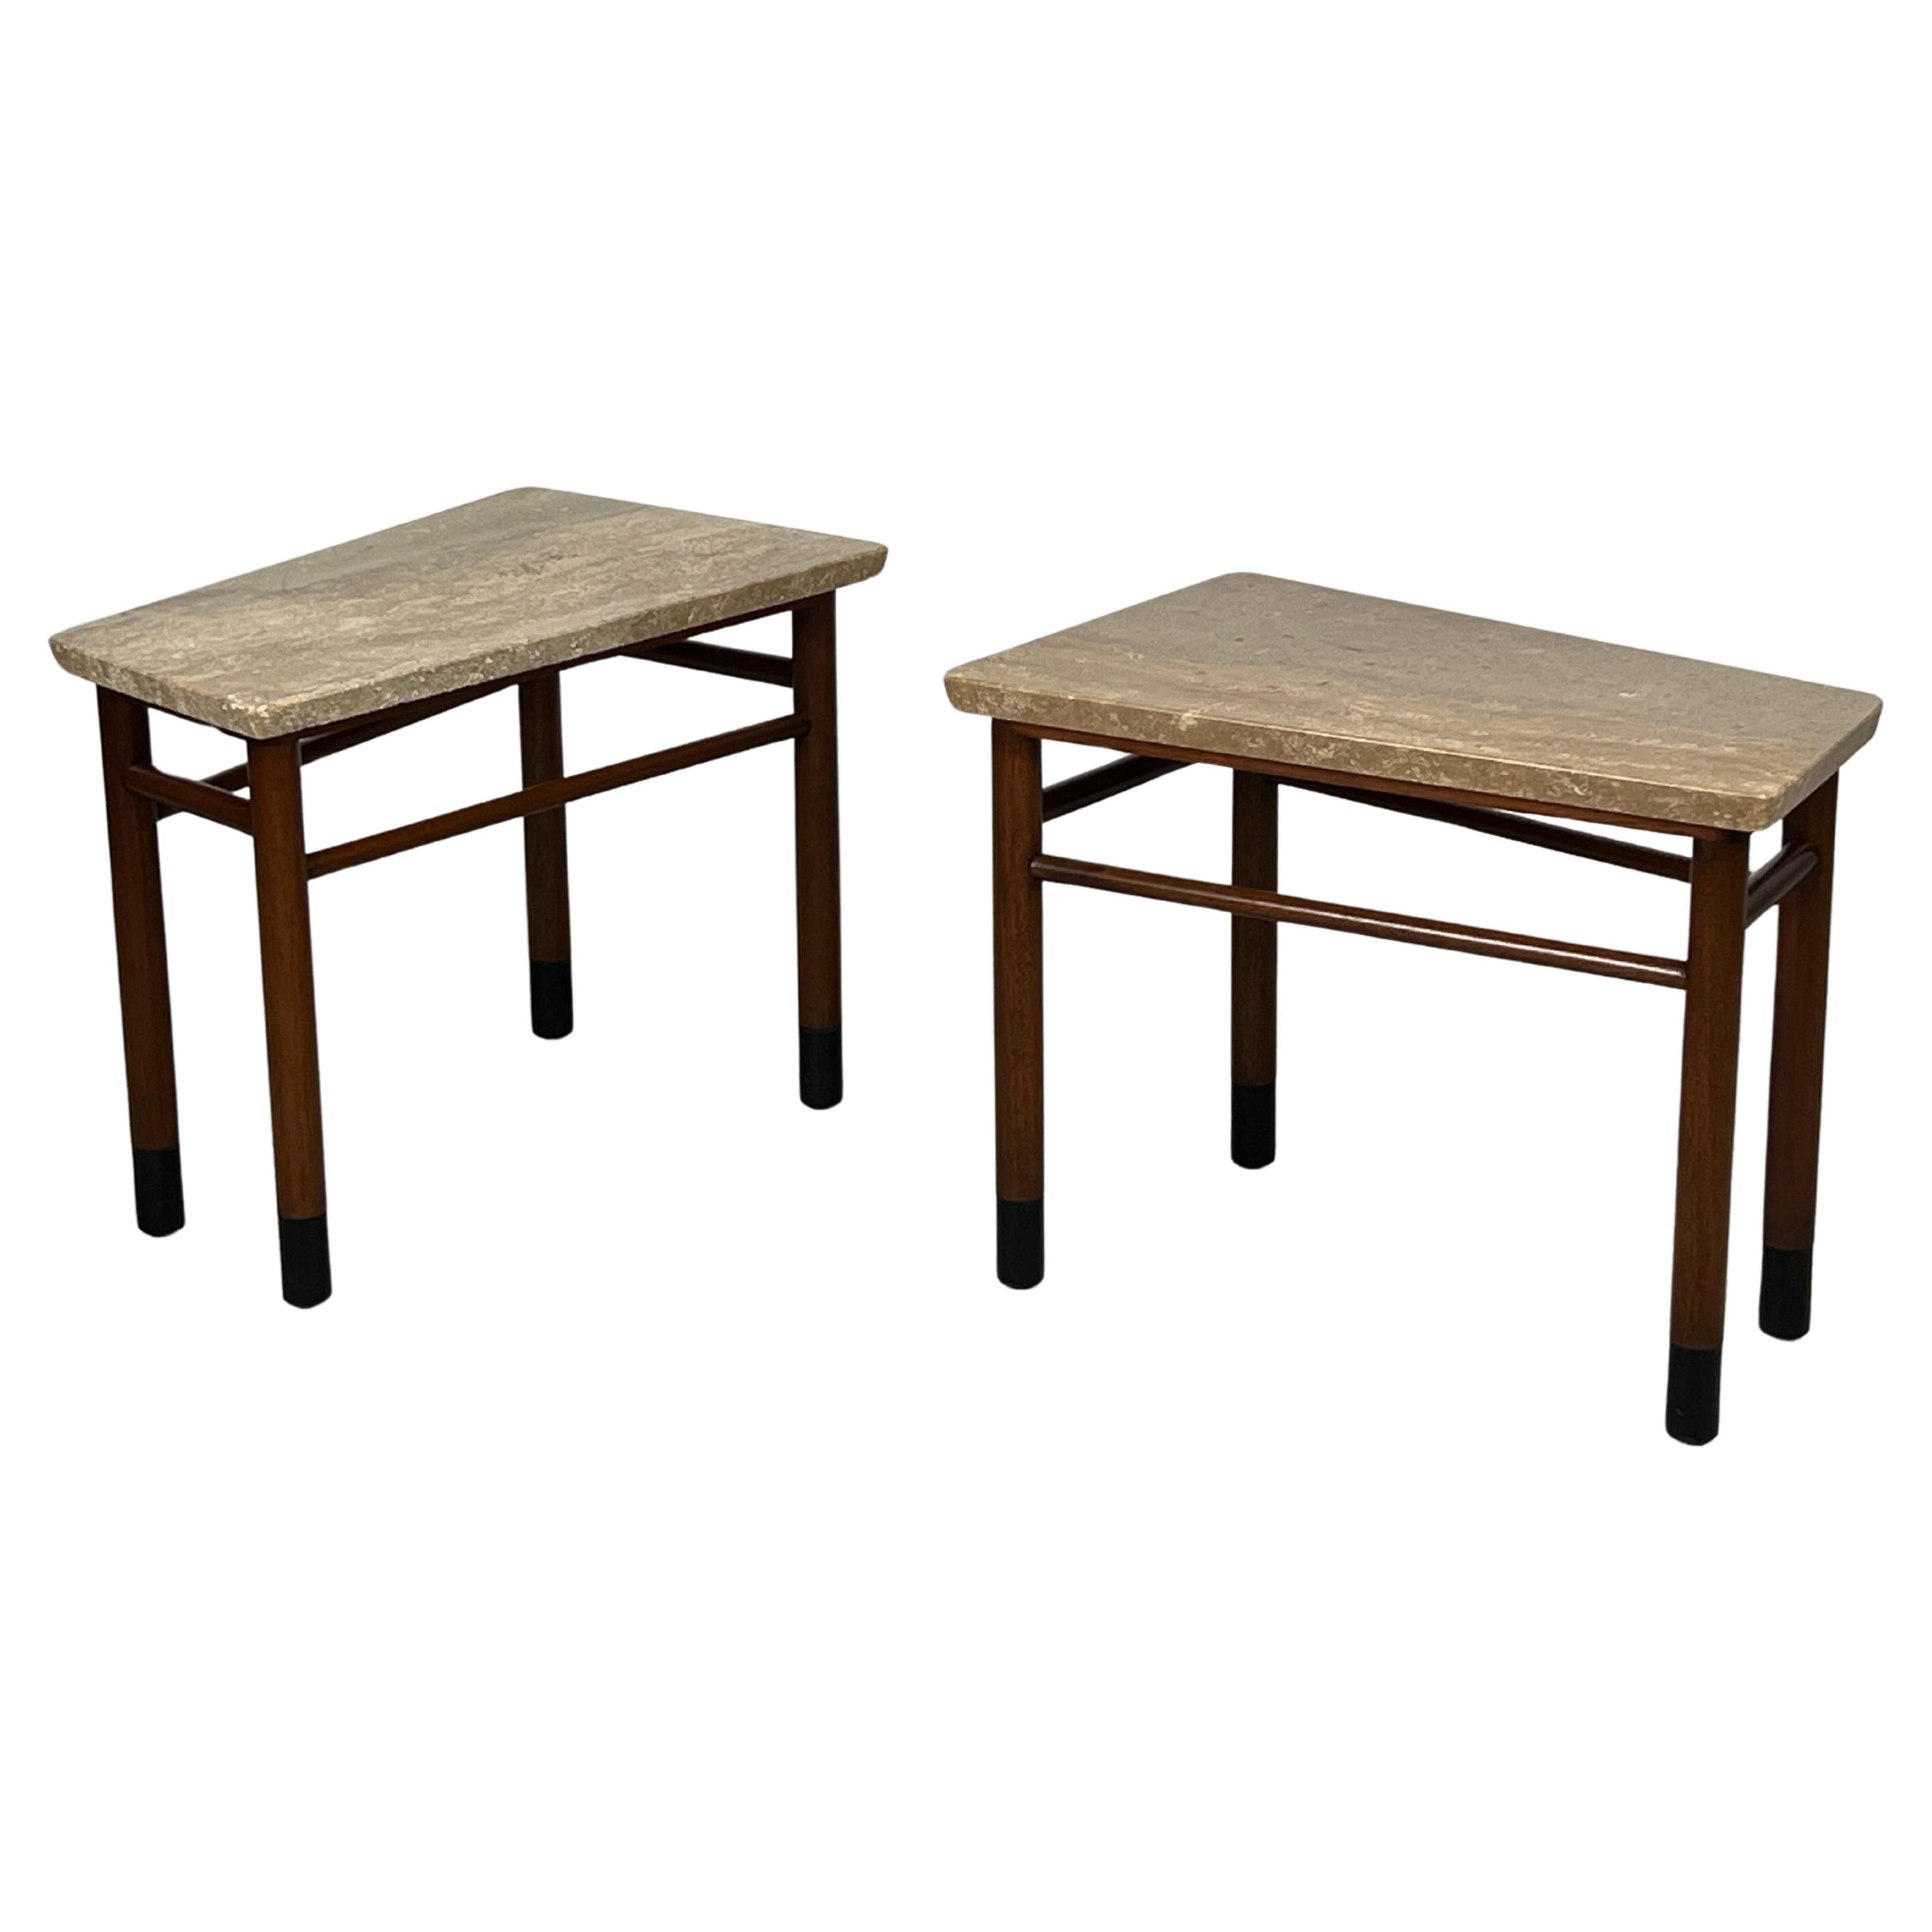 Pair of Wedge Shaped Travertine Tables by Edward Wormley for Dunbar